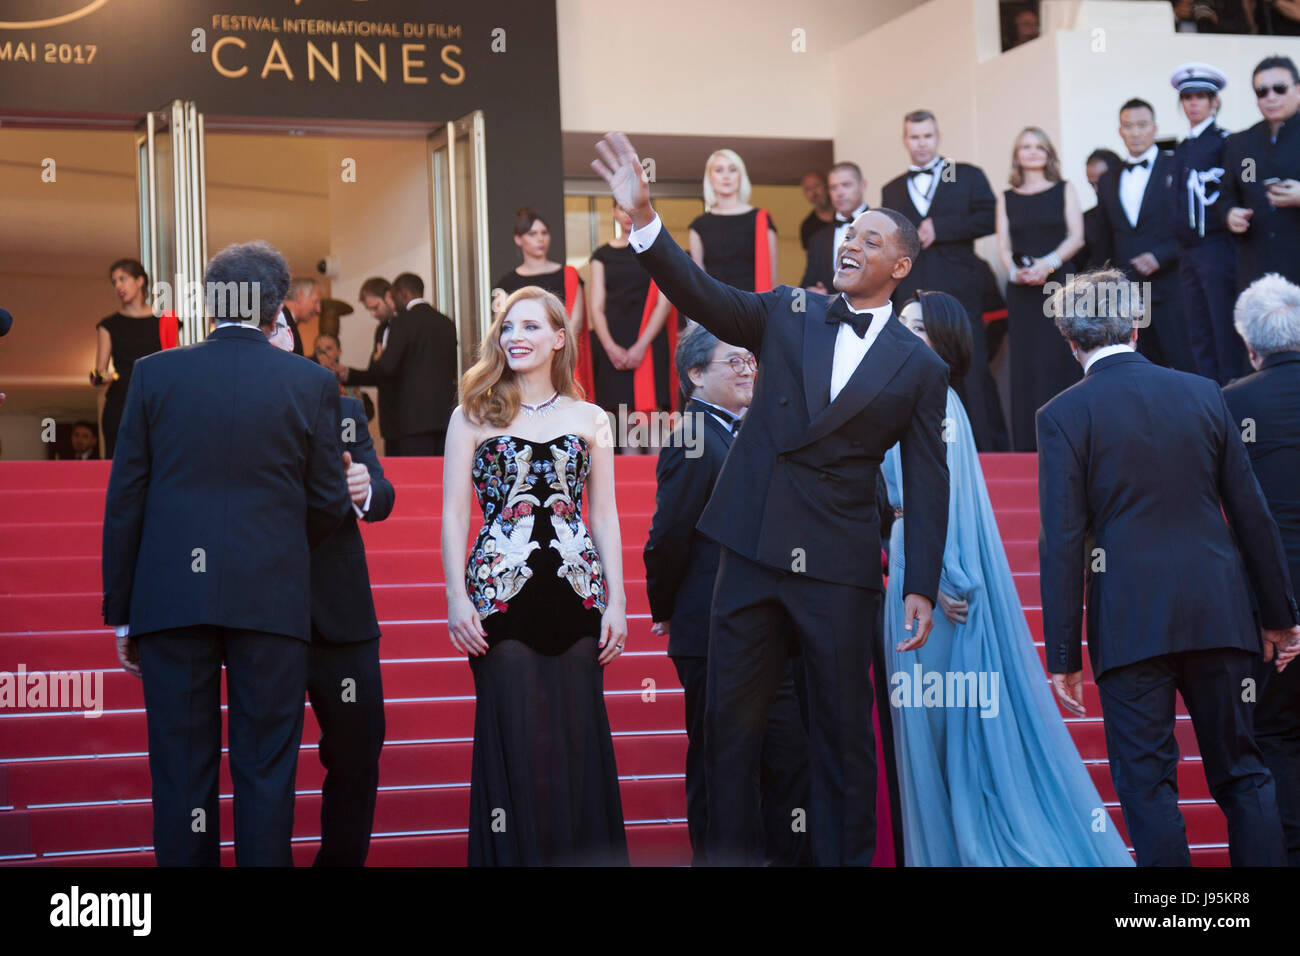 CANNES, FRANCE - MAY 17: (L-R) Jury members Agnes Jaoui, Jessica Chastain, Will Smith, President of the jury Pedro Almodovar and jury members Park Chan-wook, Gabriel Yared, and Fan Bingbing attend the 'Ismael's Ghosts (Les Fantomes d'Ismael)' screening and Opening Gala during the 70th annual Cannes Film Festival at Palais des Festivals on May 17, 2017 in Cannes, France. Laurent Koffel/Alamy Live News Stock Photo